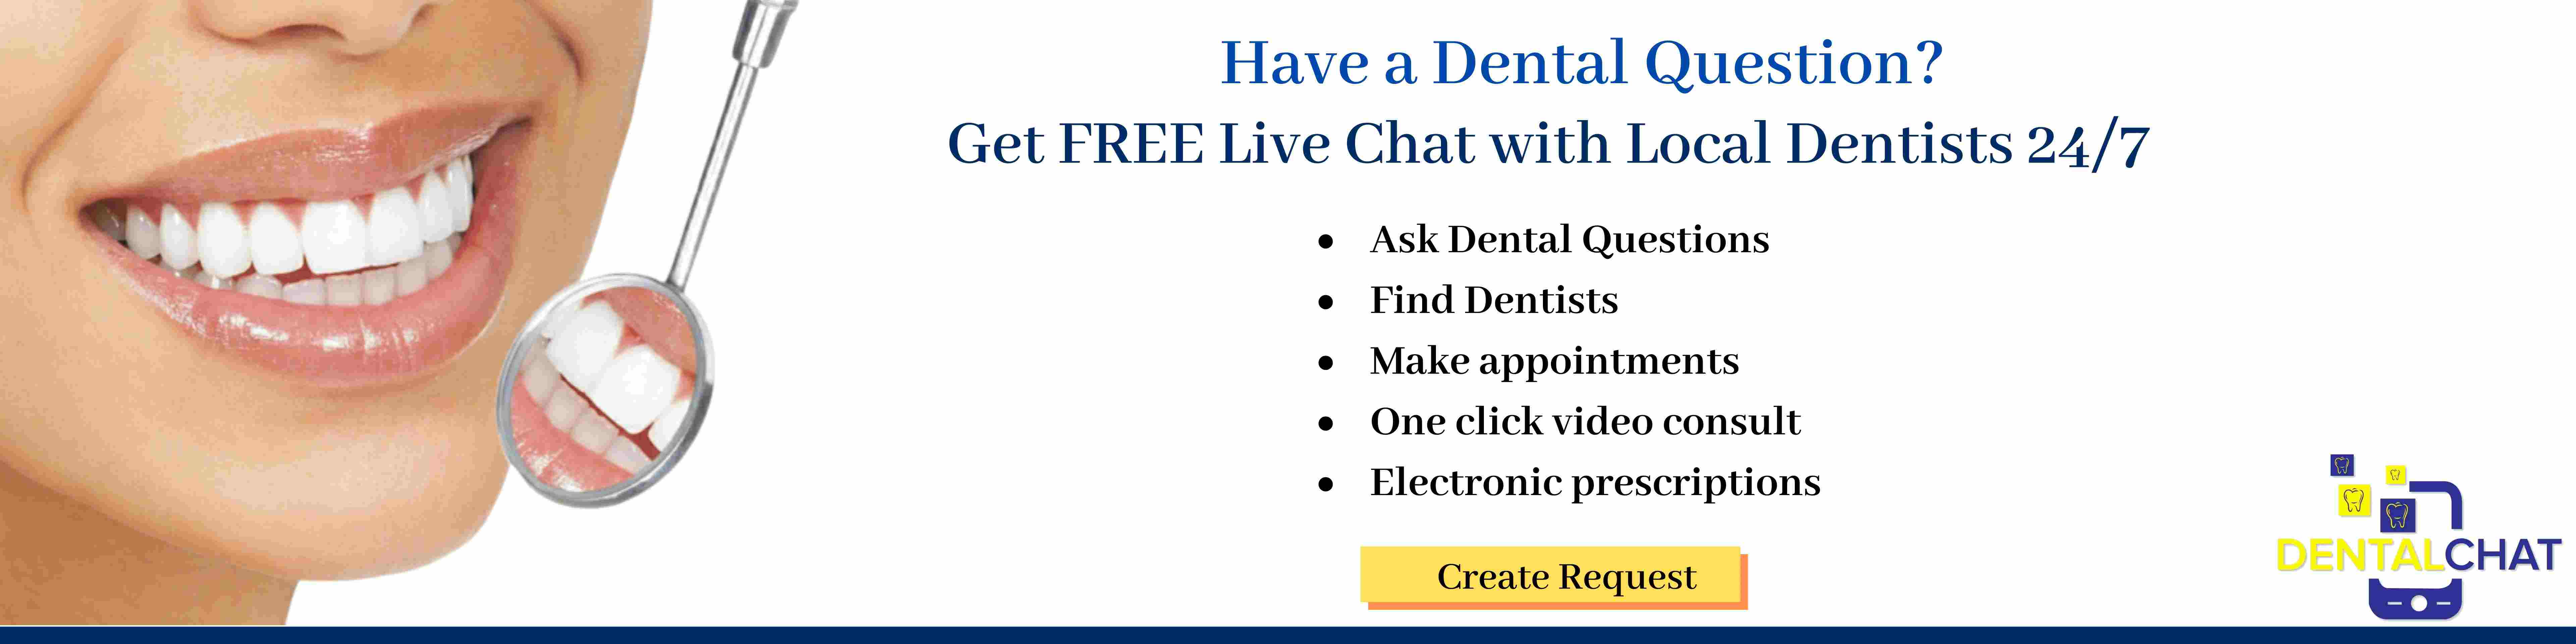 Dental Specialties Chat, Dental Specialty Discussion Online